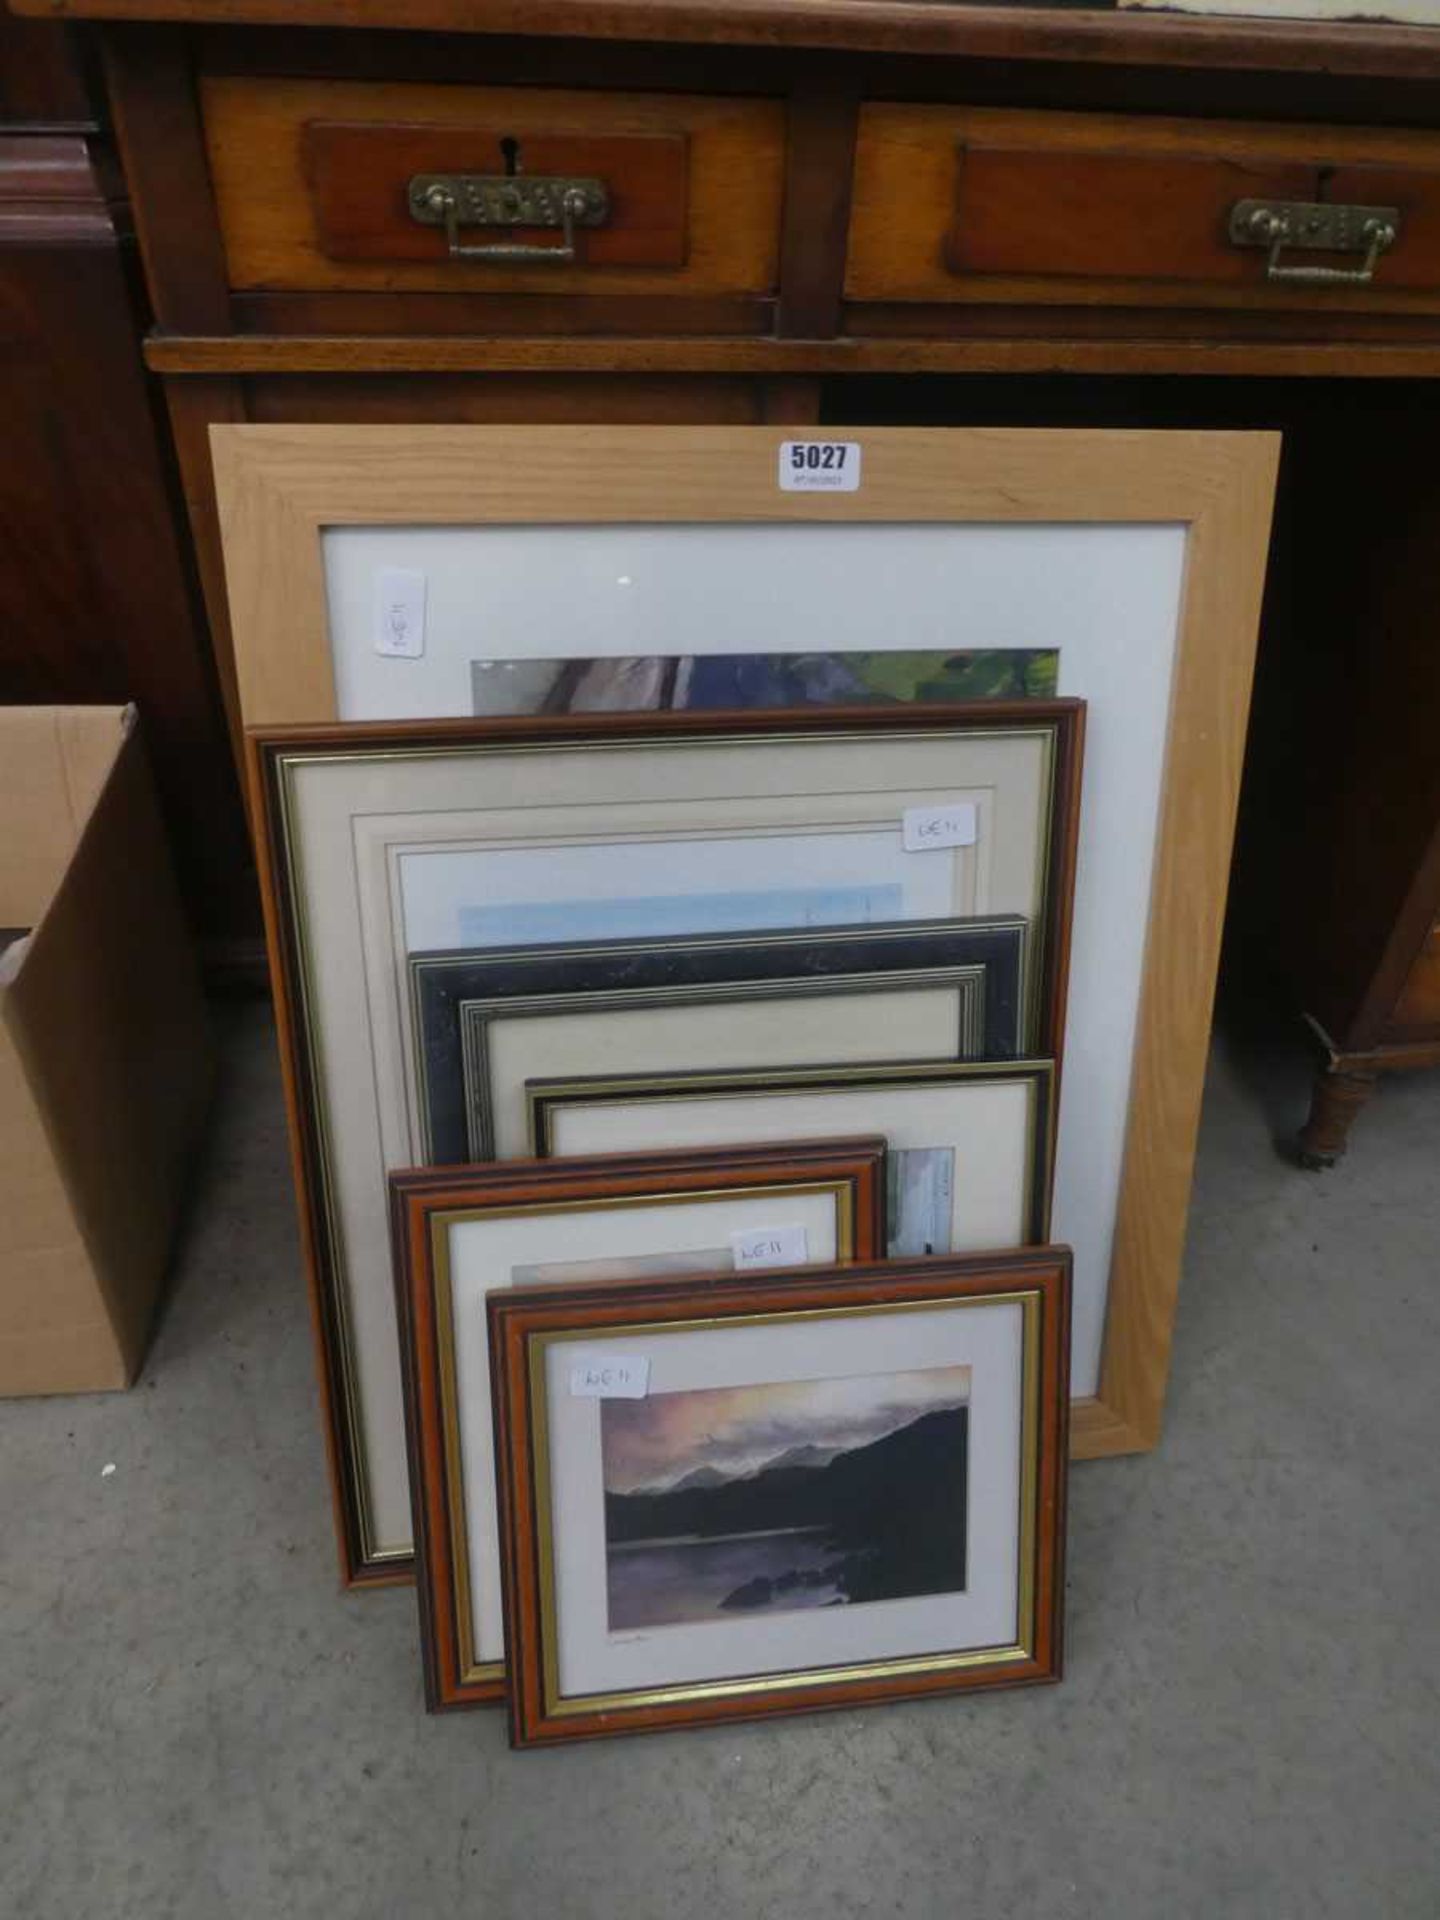 Quantity of rural prints to include lakes, mountains, winter scene and forest plus a coastal